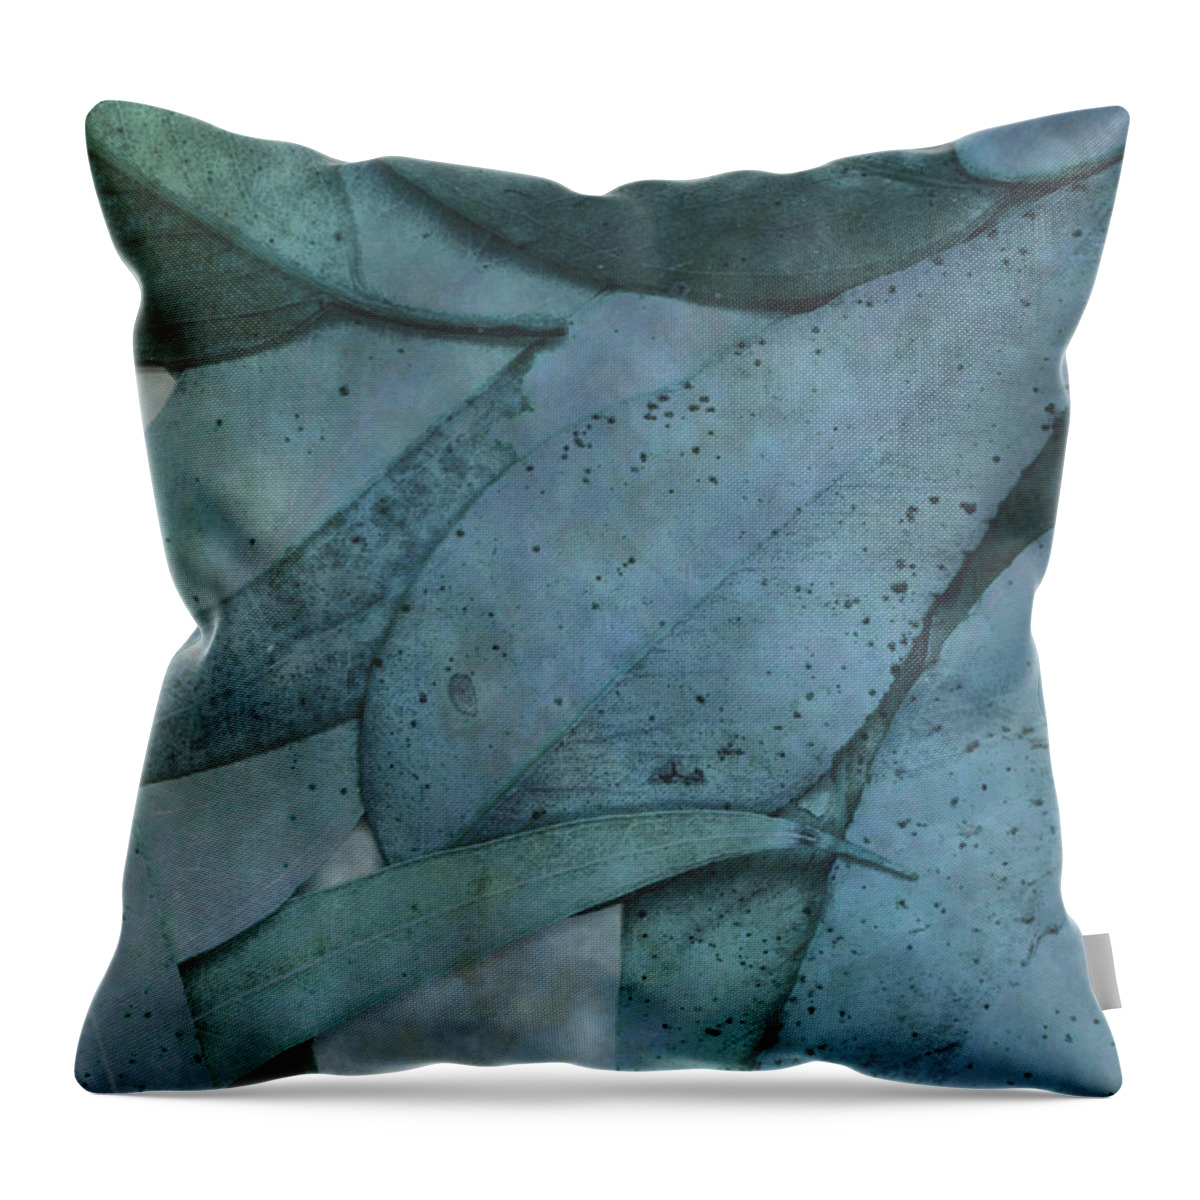 Large Group Of Objects Throw Pillow featuring the digital art Assorted Leaves by Don Bishop